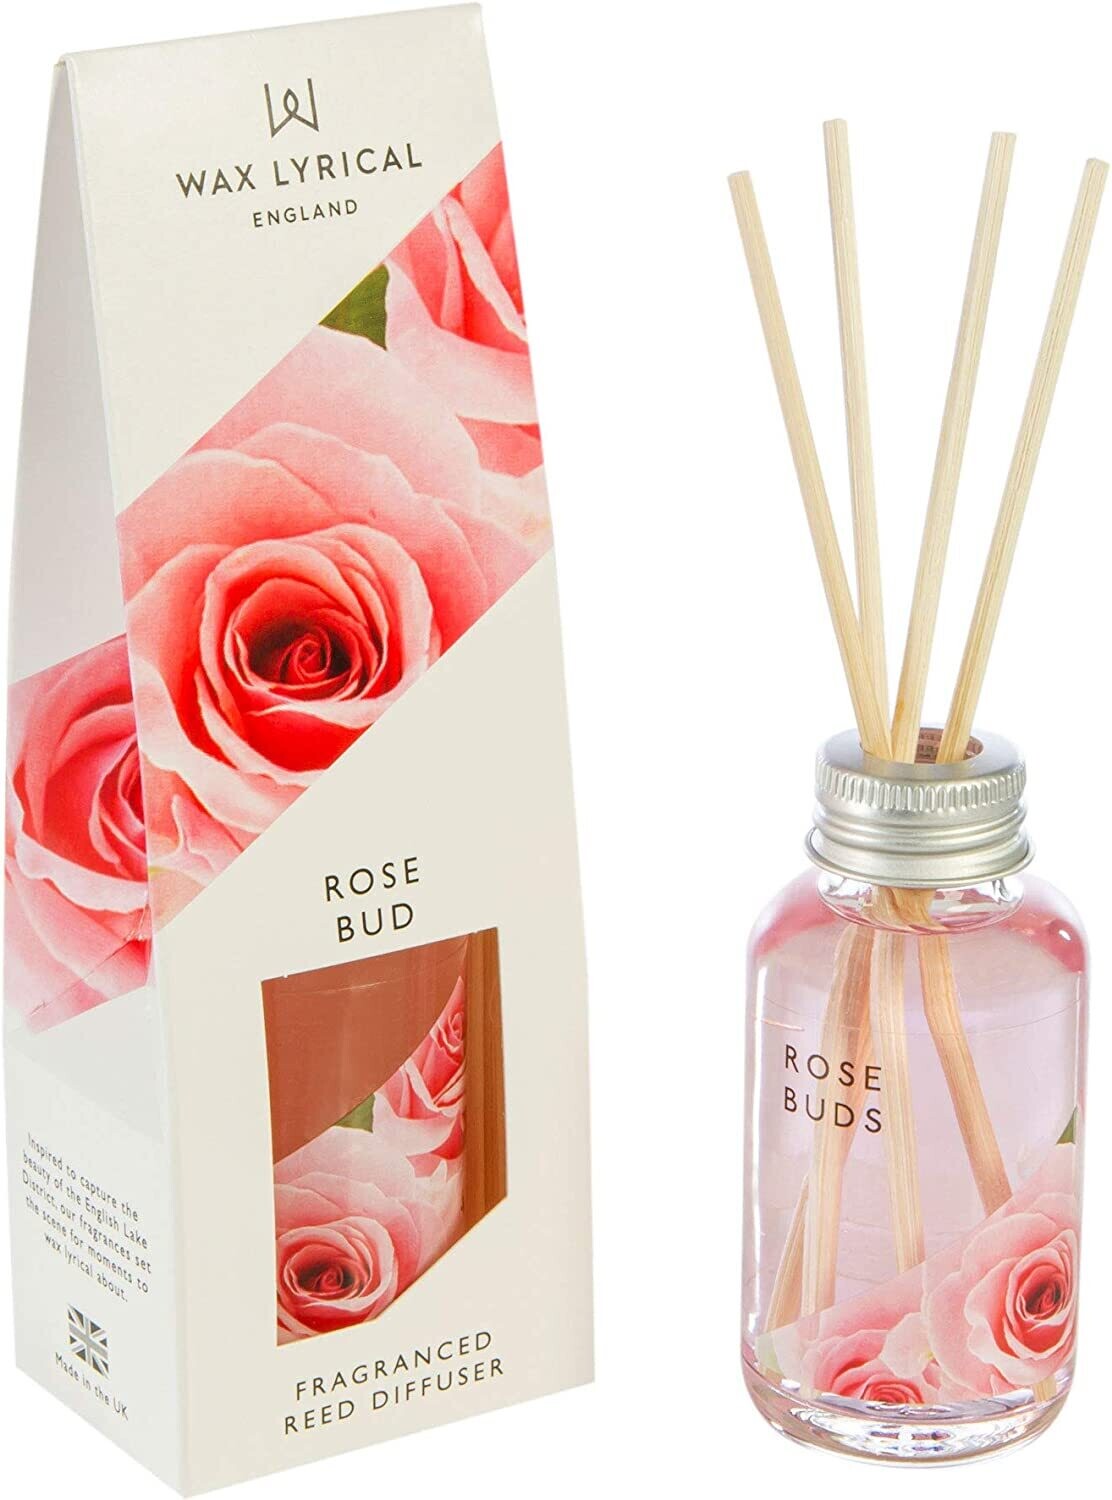 Rose Bud Reed Diffuser